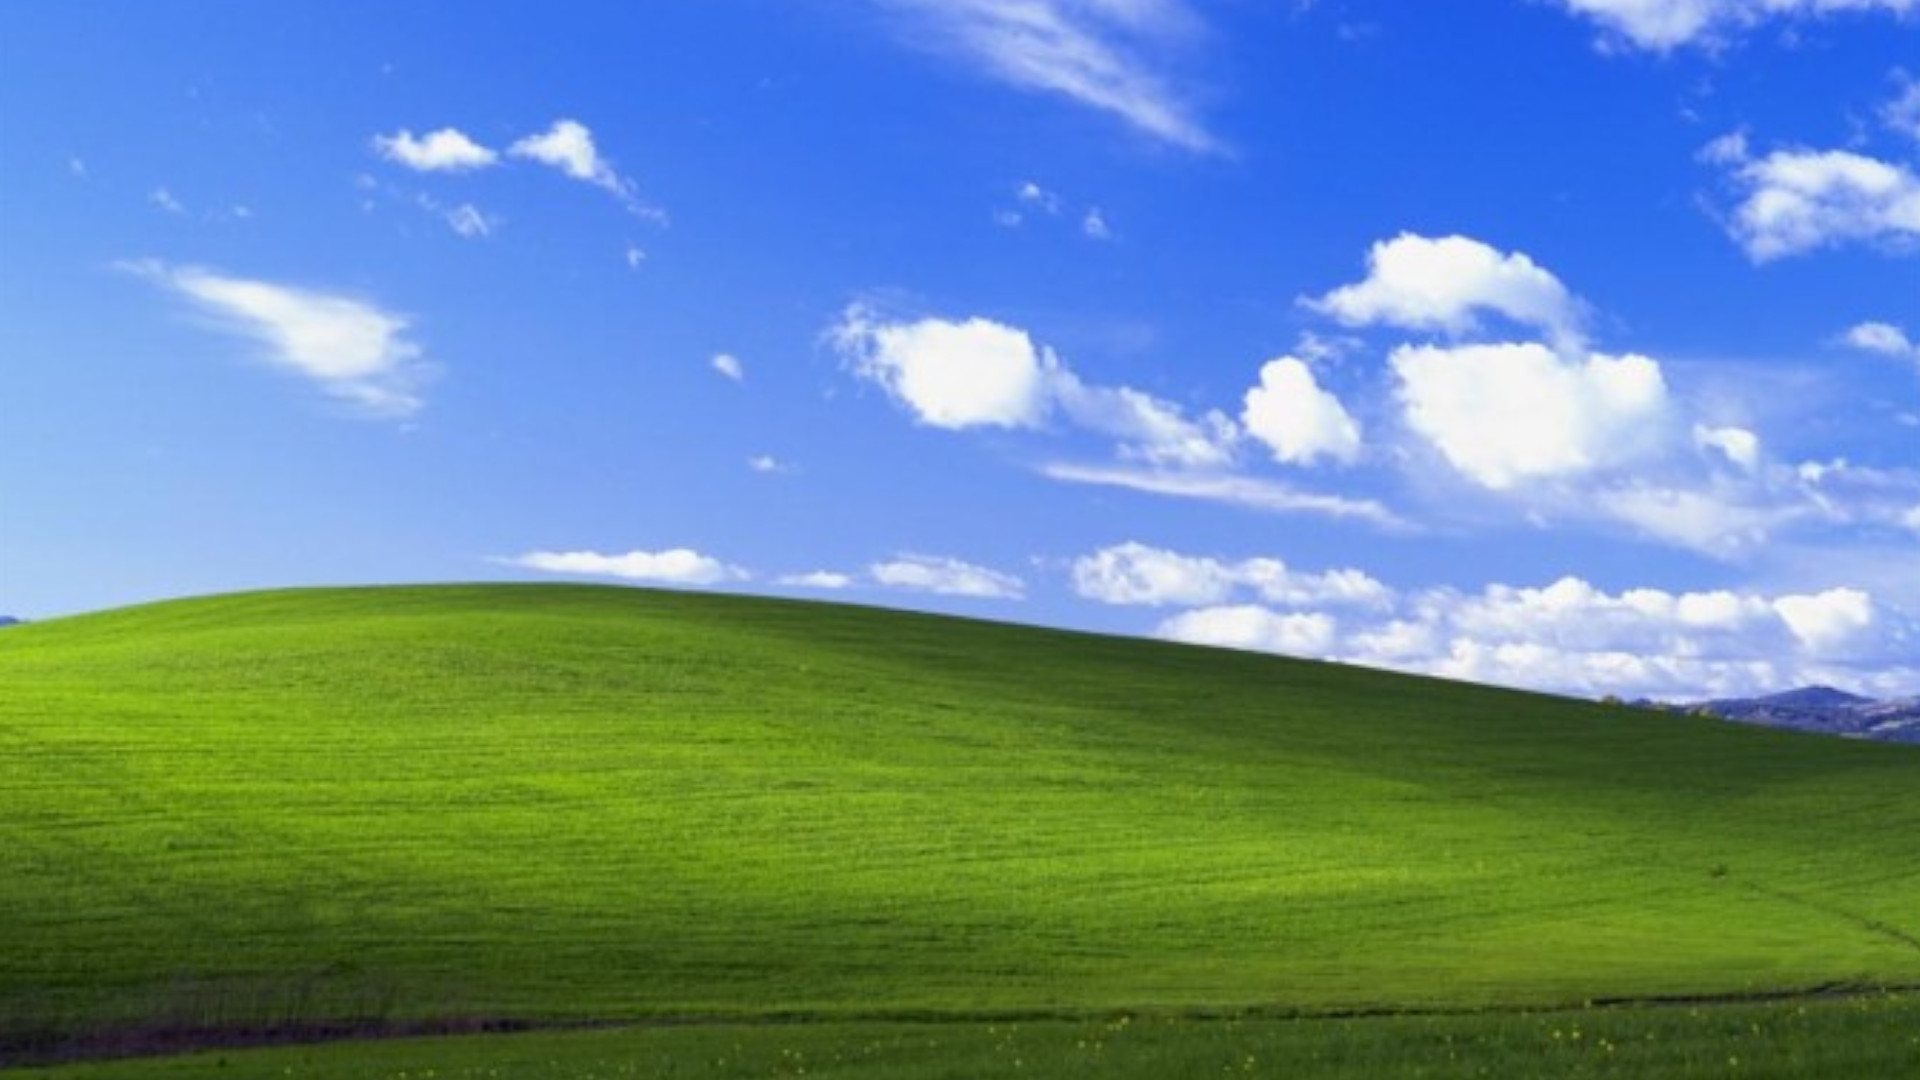 Windows XP source code is reportedly circulating the internet | PCGamesN